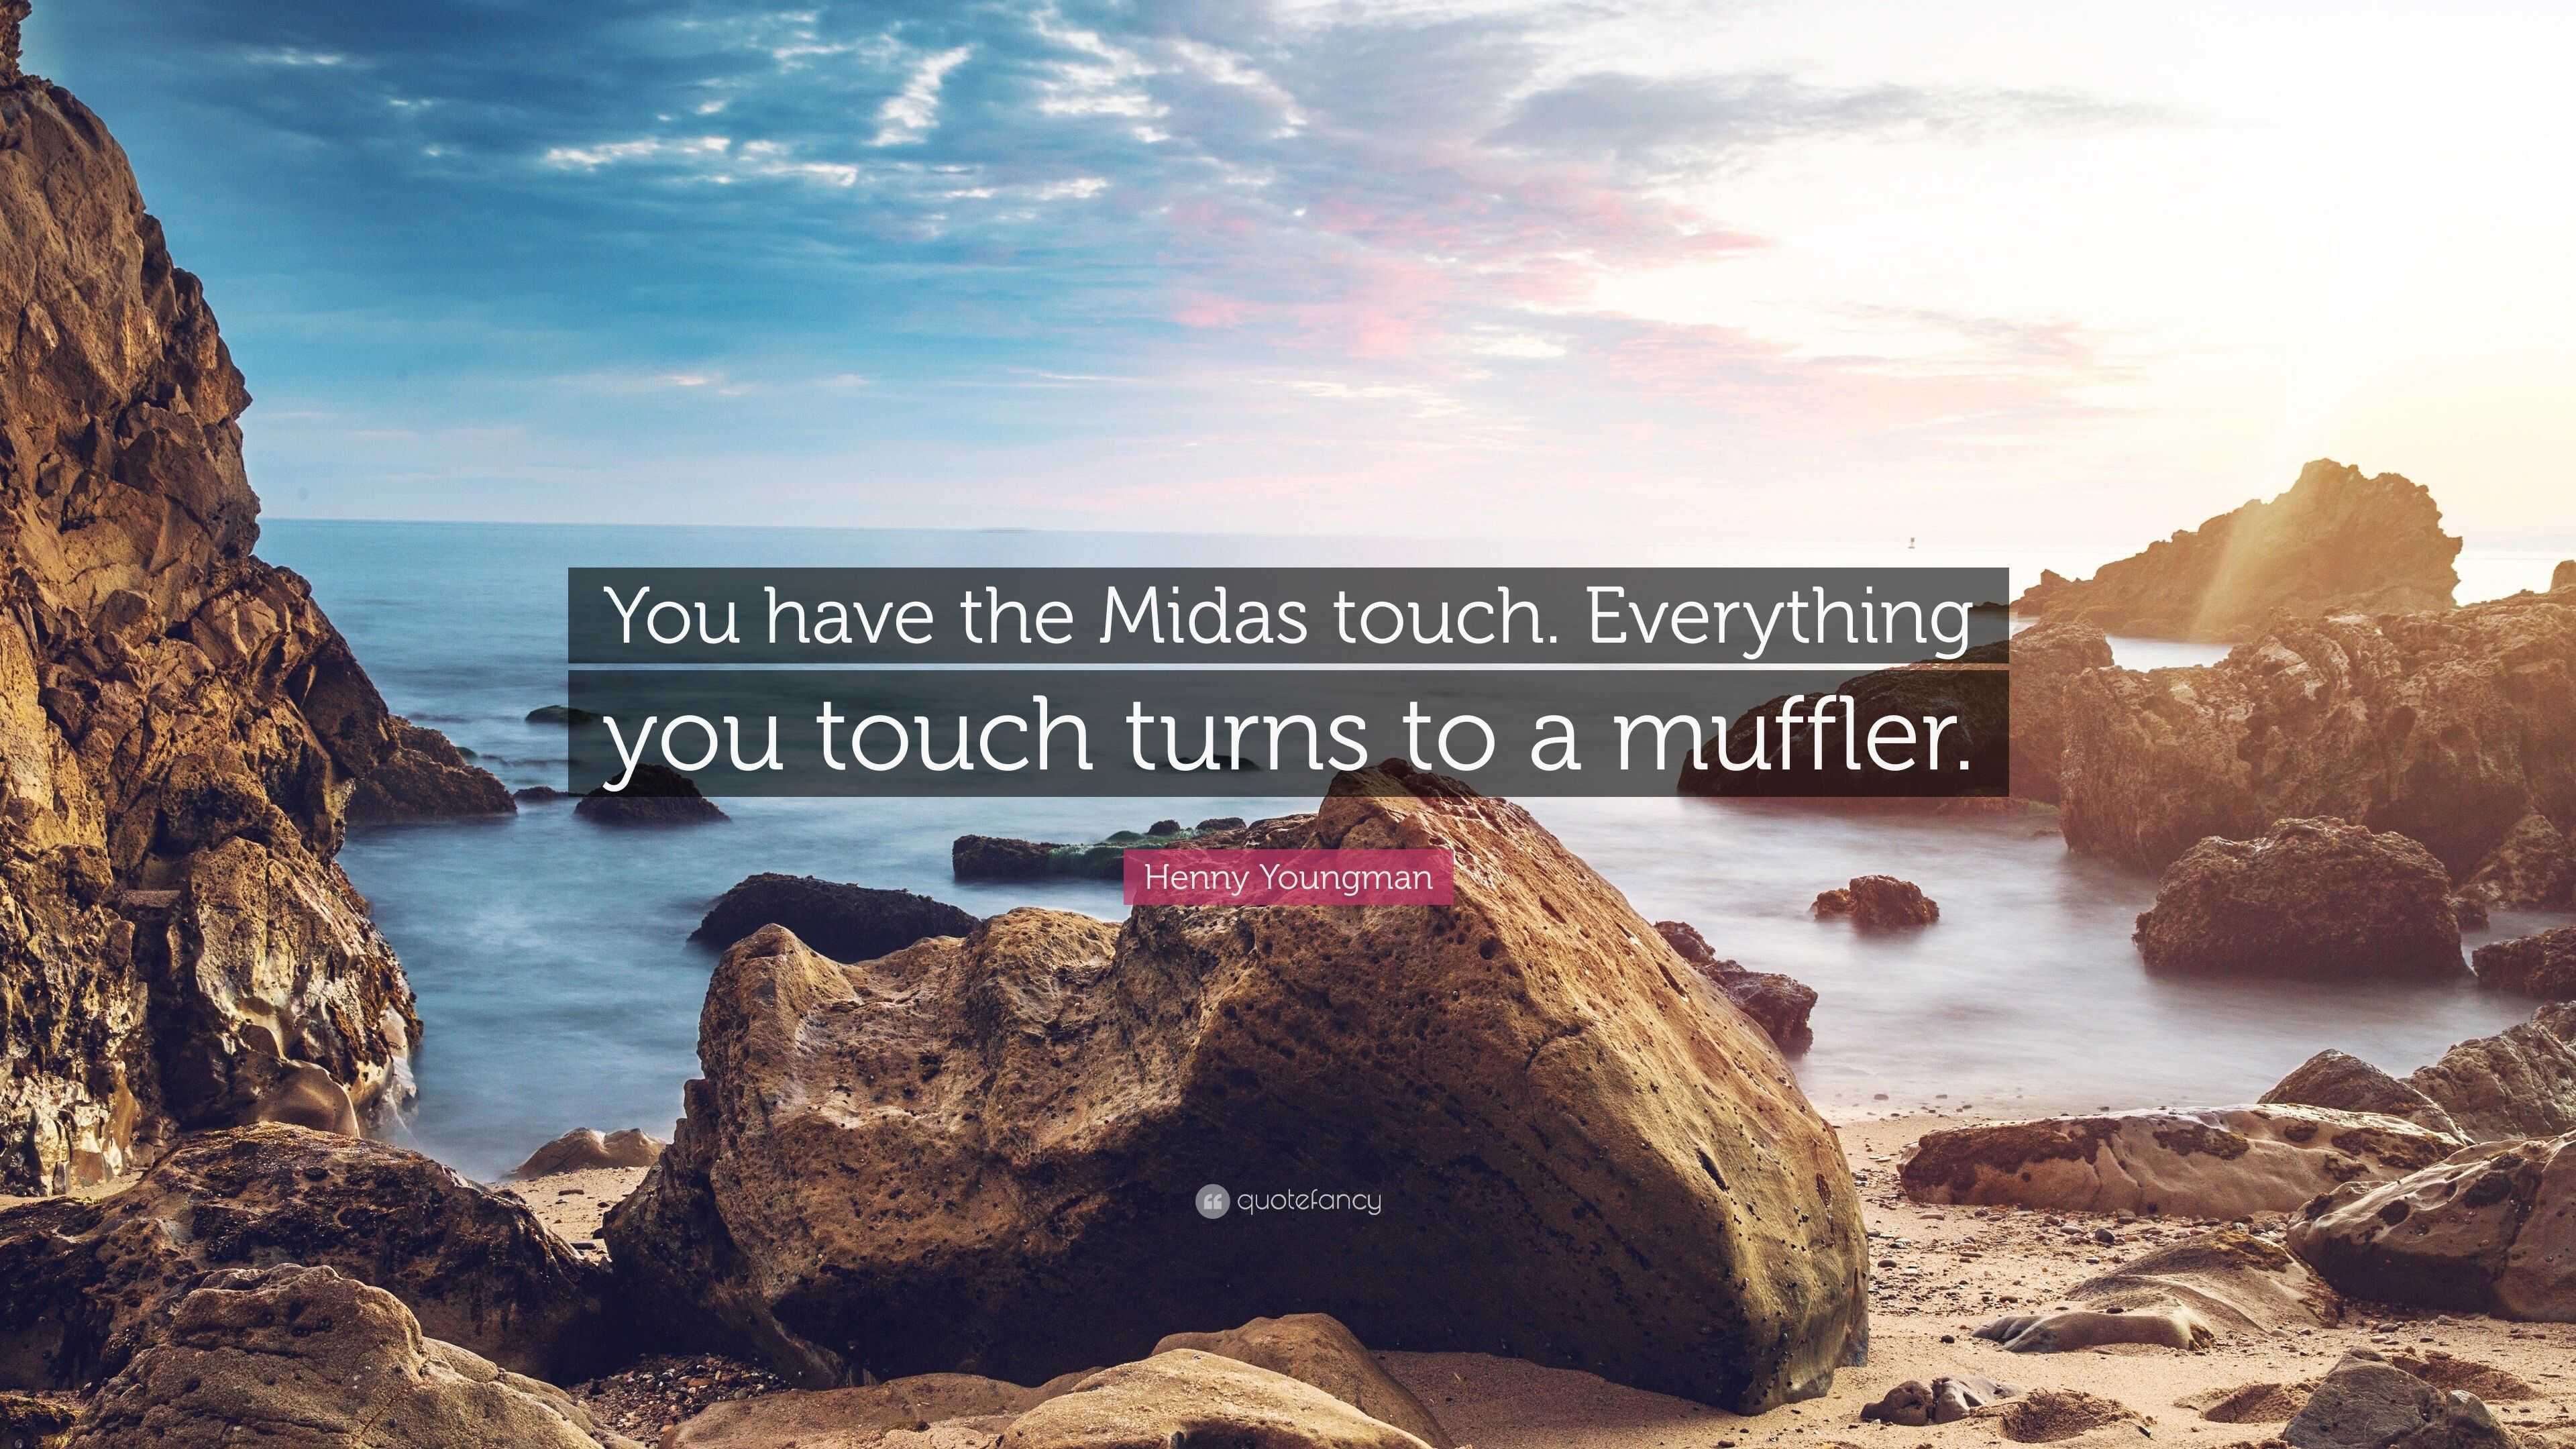 Henny Youngman quote: You have the Midas touch. Everything you touch turns  to